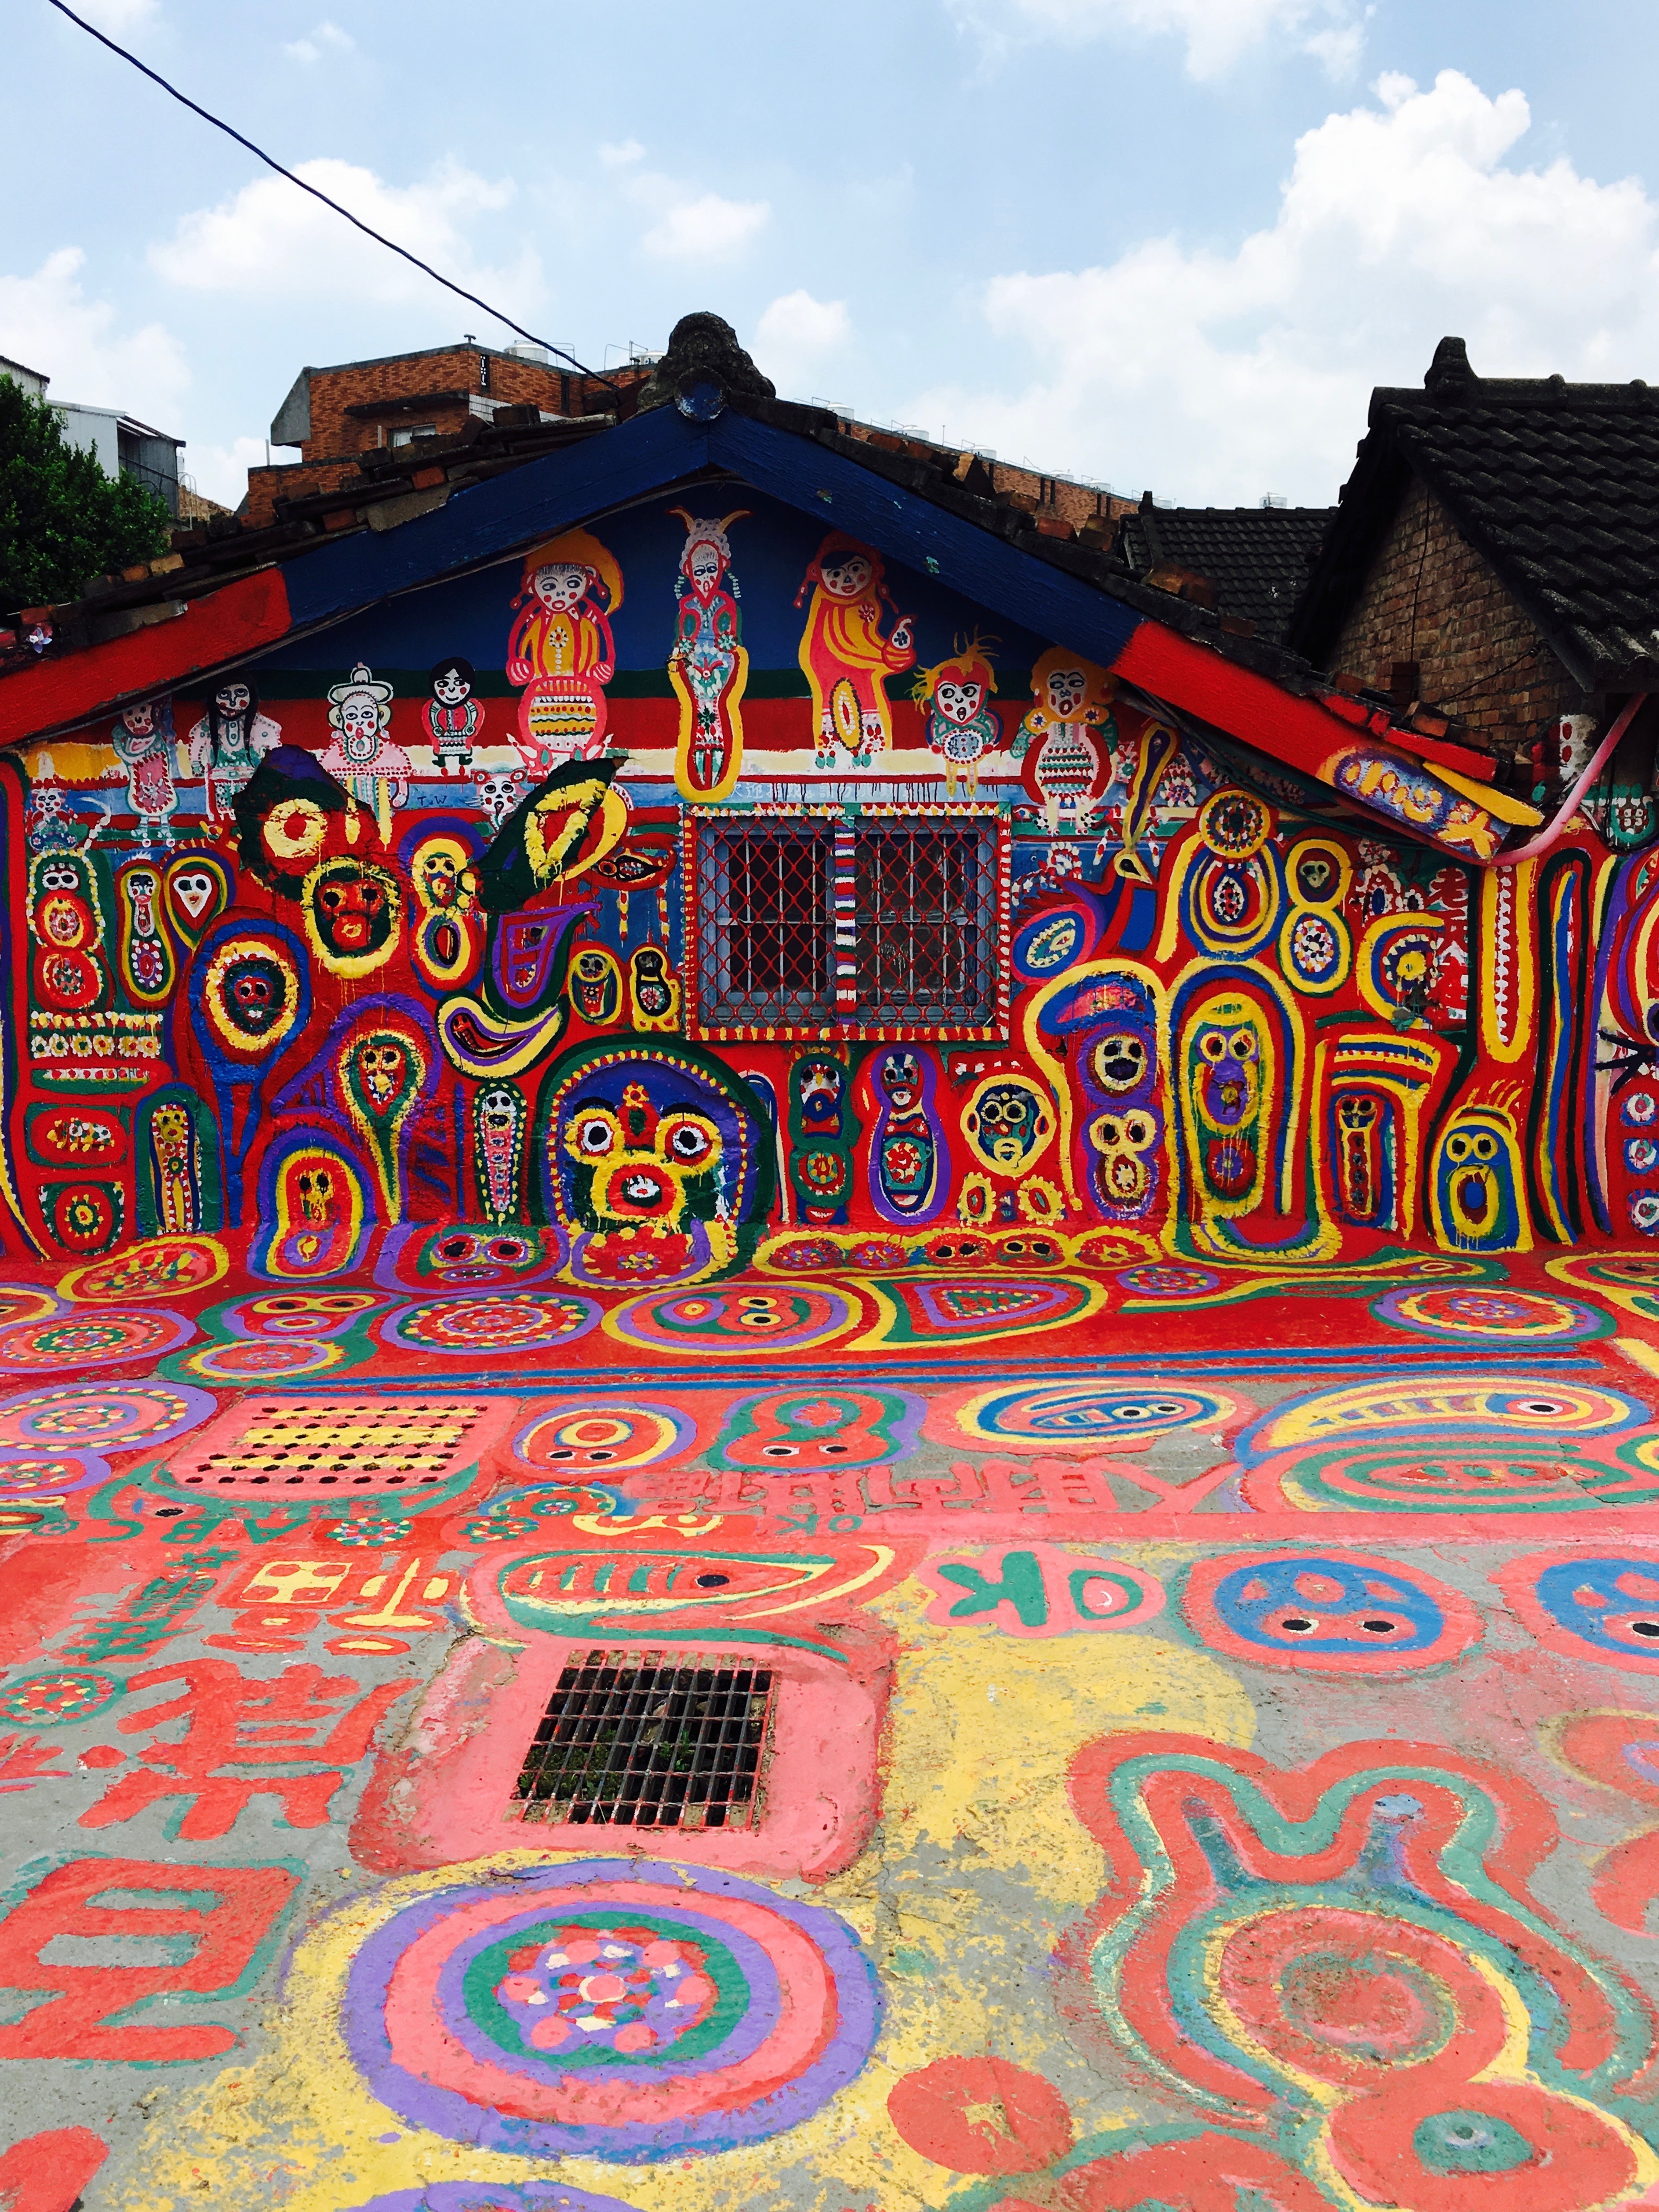 A house painted in vibrant colors in Taichung's Rainbow Village, July 2016. (Aidyn Fitzpatrick)